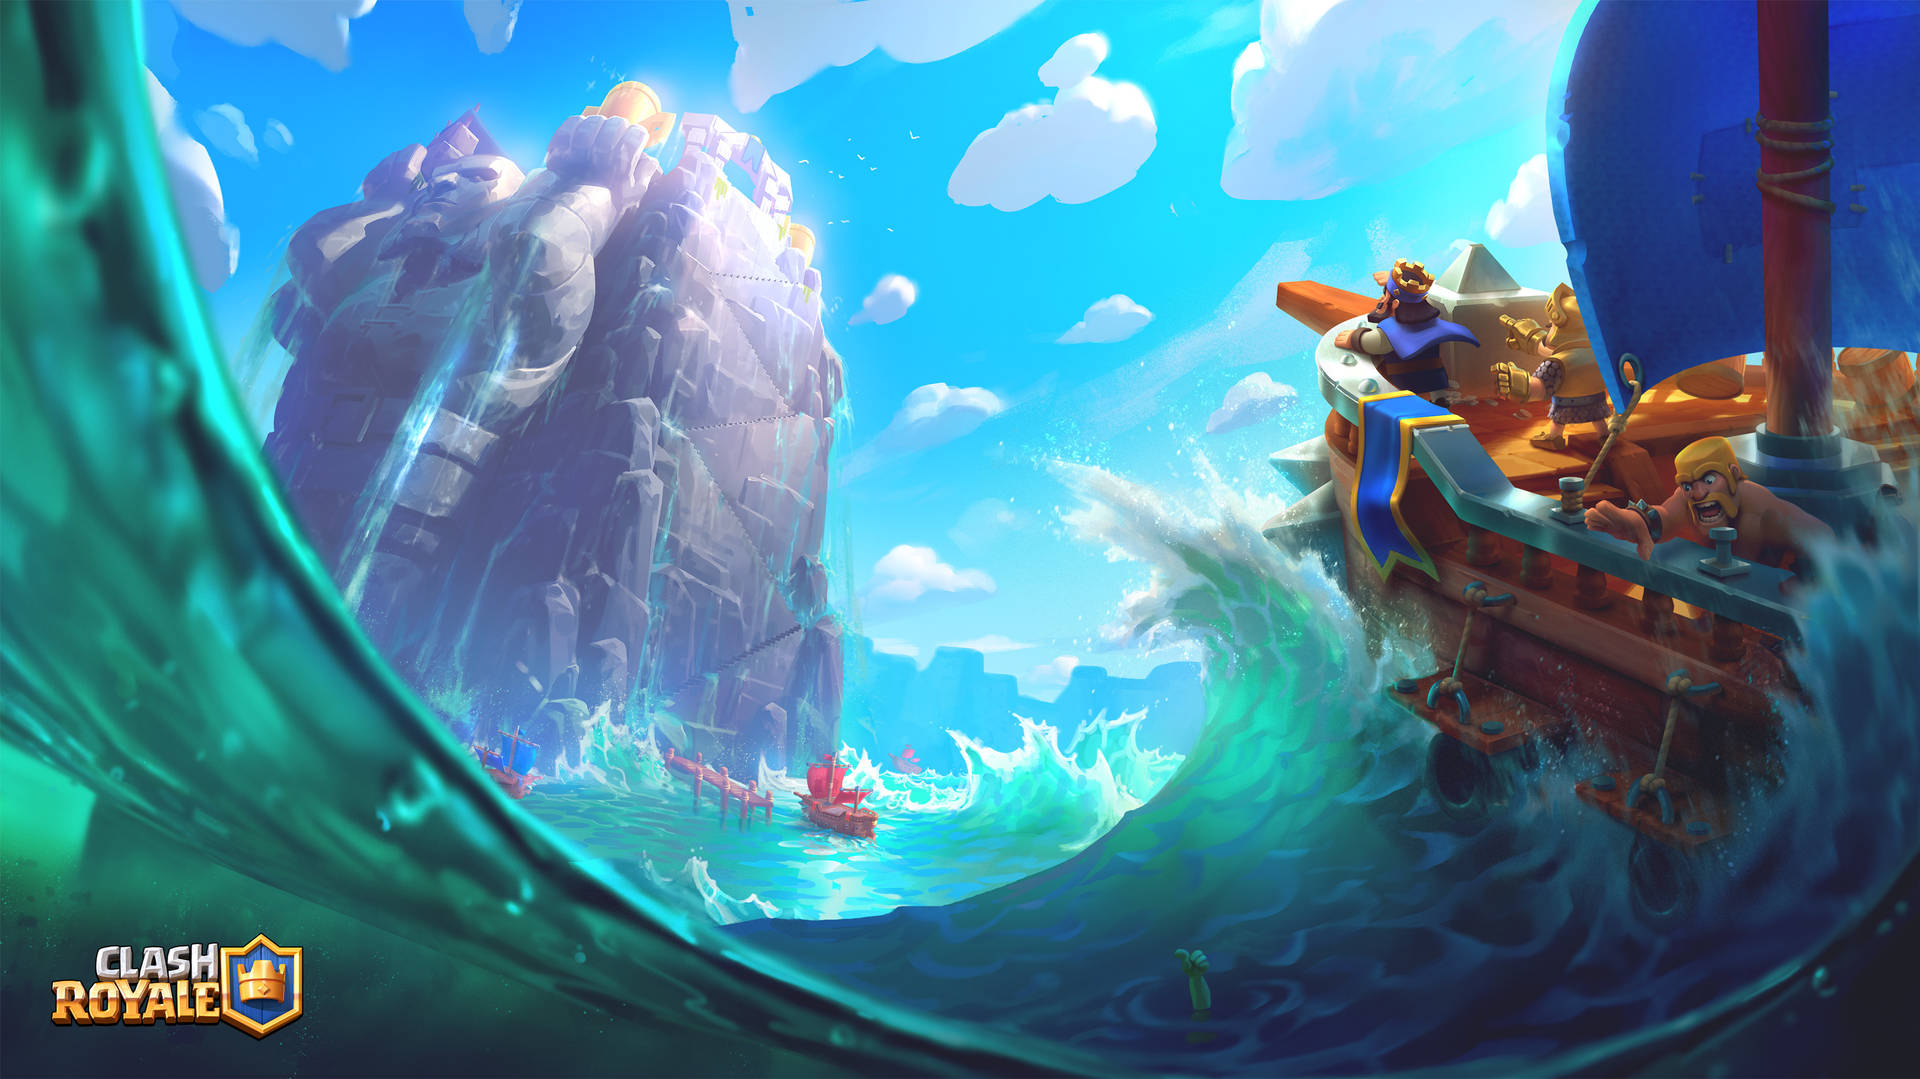 Ocean Wallpaper From The Clash Royale Phone Game Wallpaper